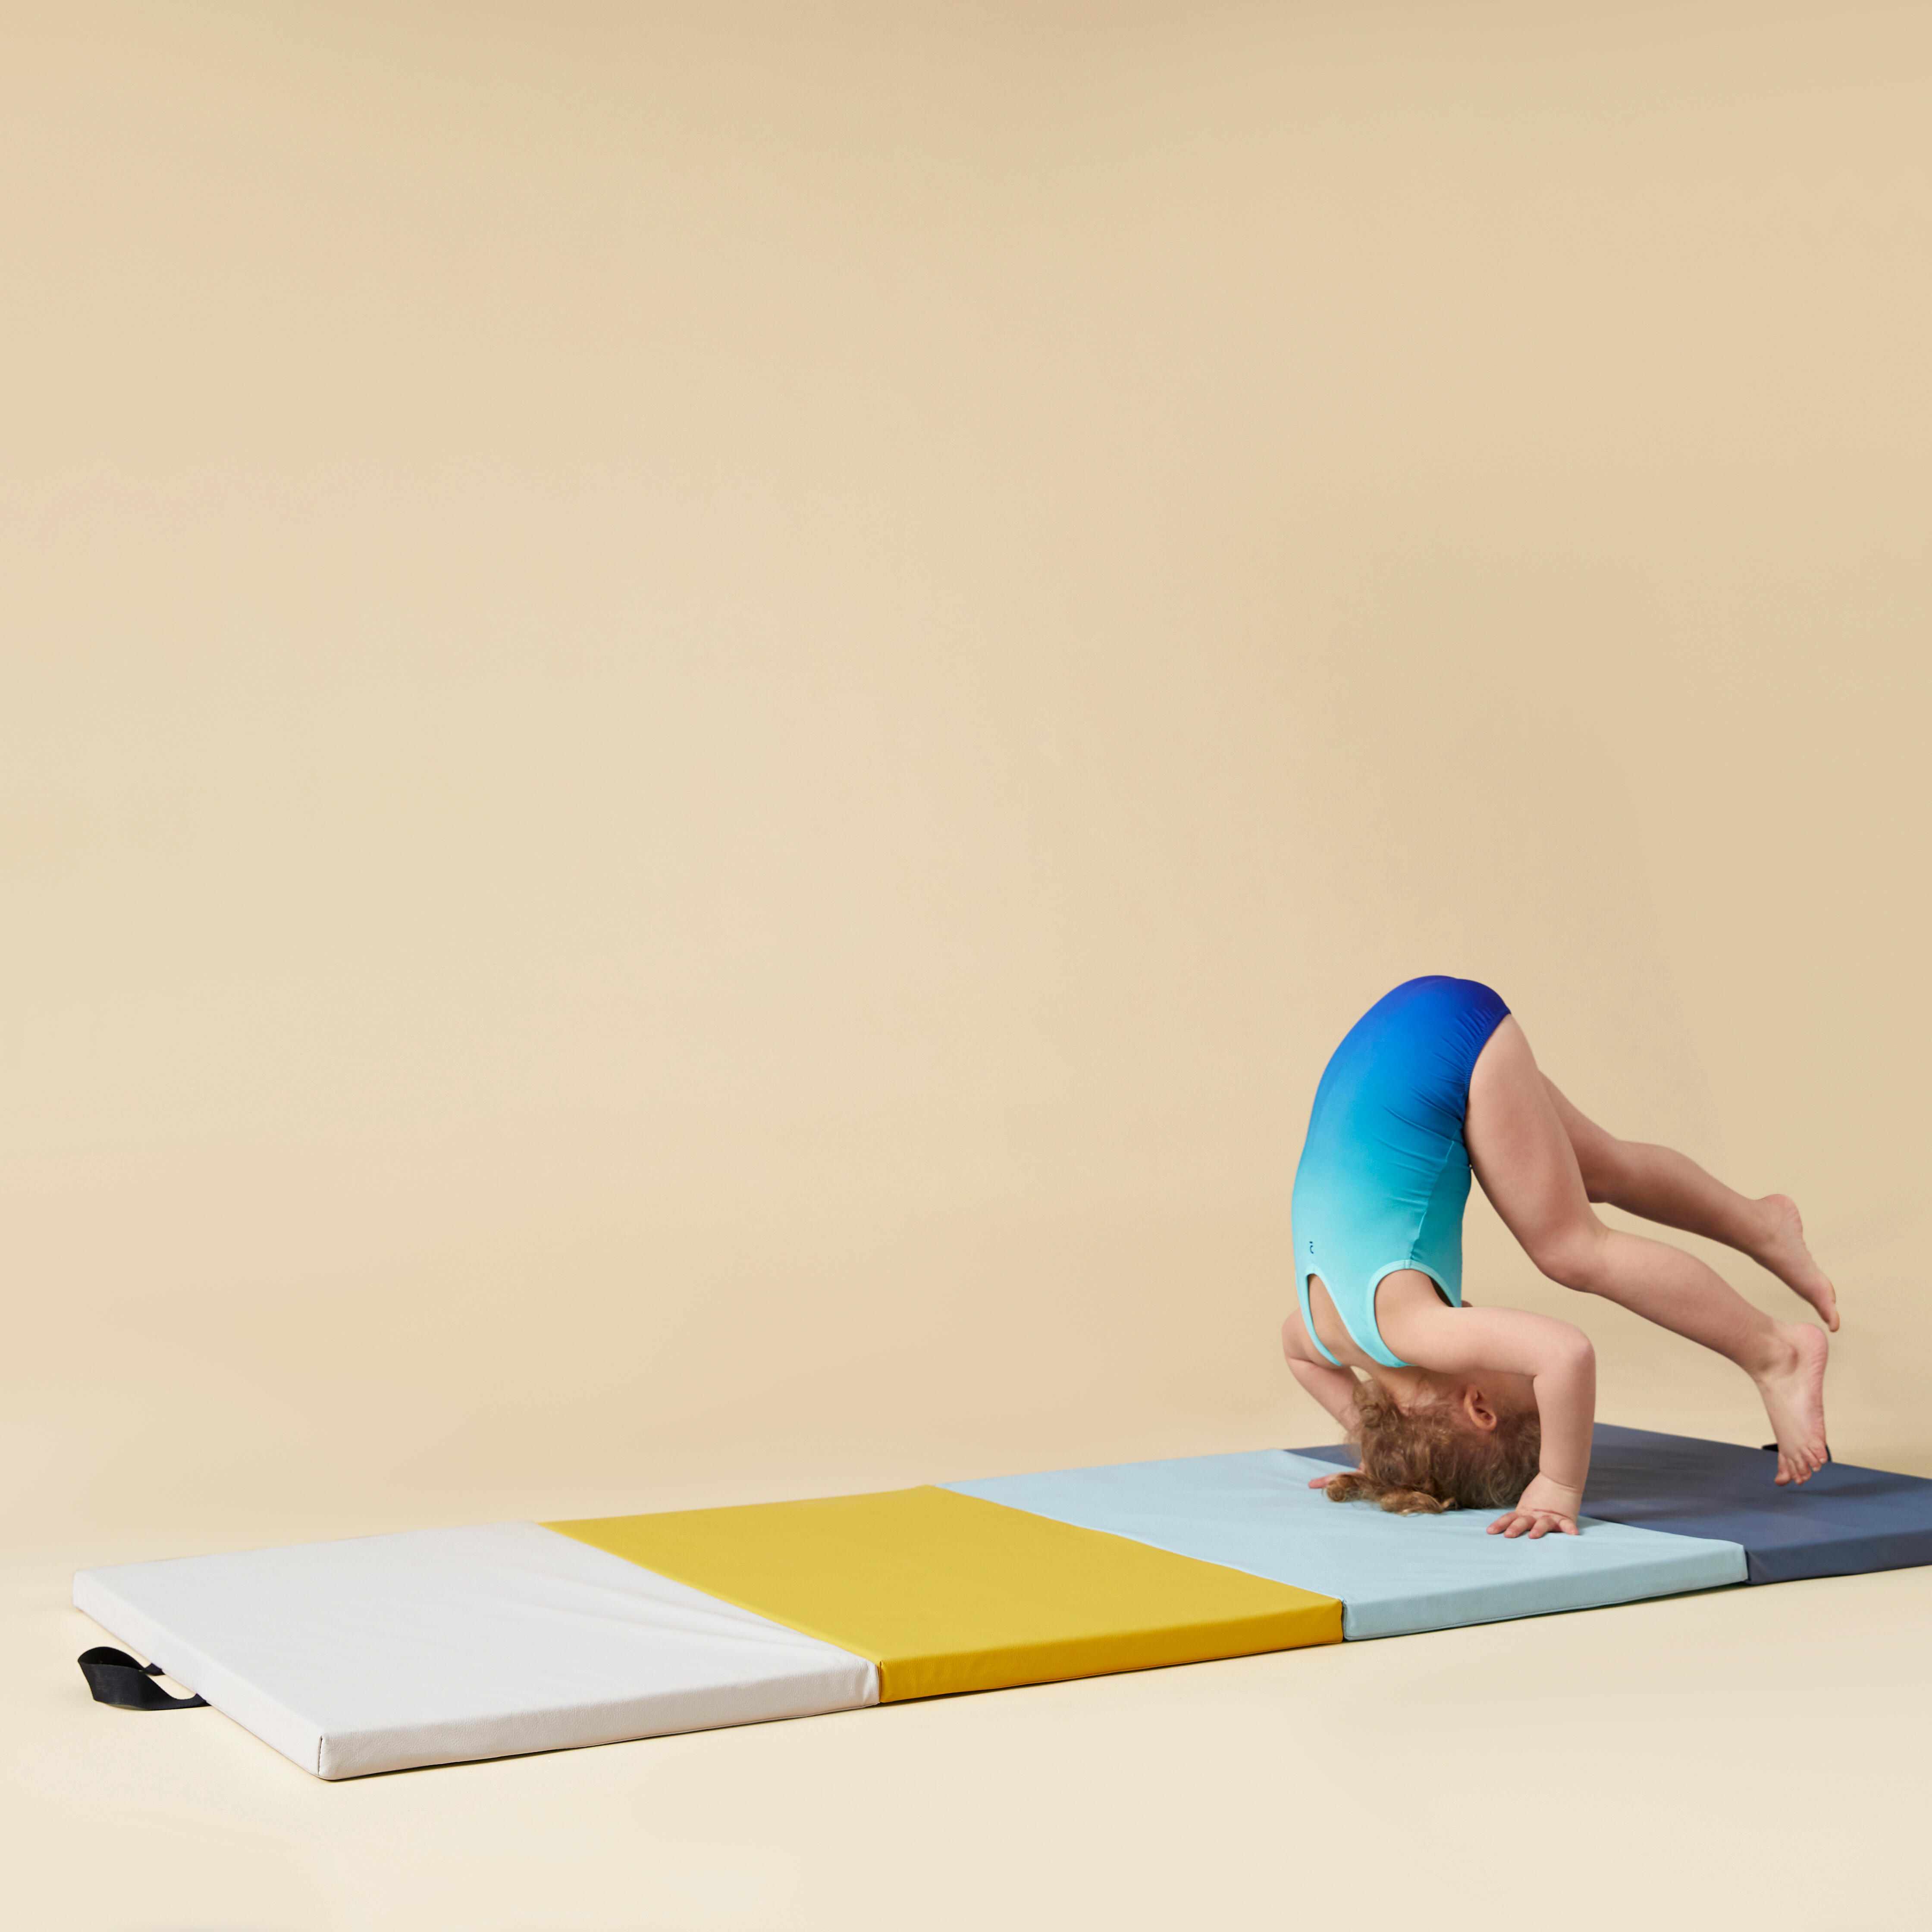 An exercise mat for Yoga and home workouts by Decathlon